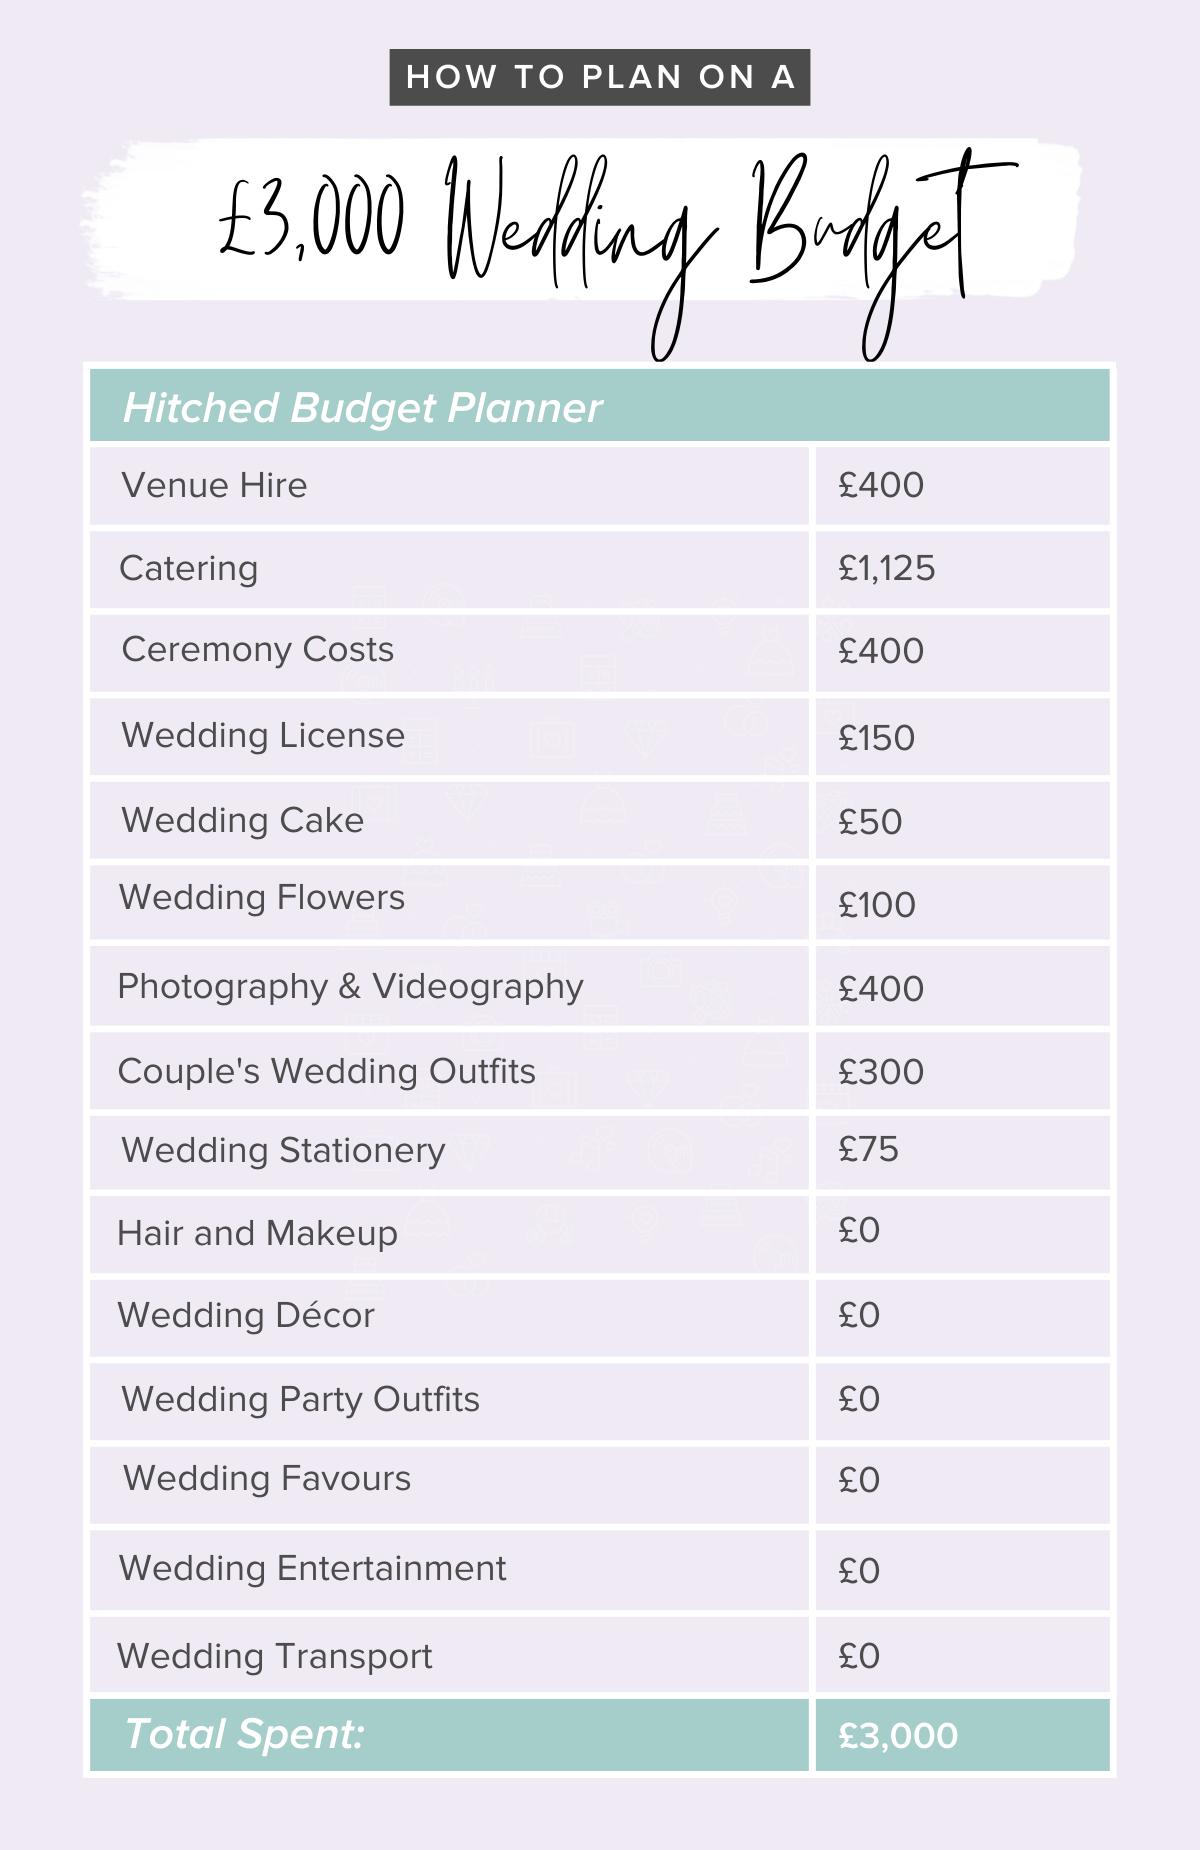 Budget Wedding Guide How To Plan A Wedding For Just £3000 Uk Uk 4163